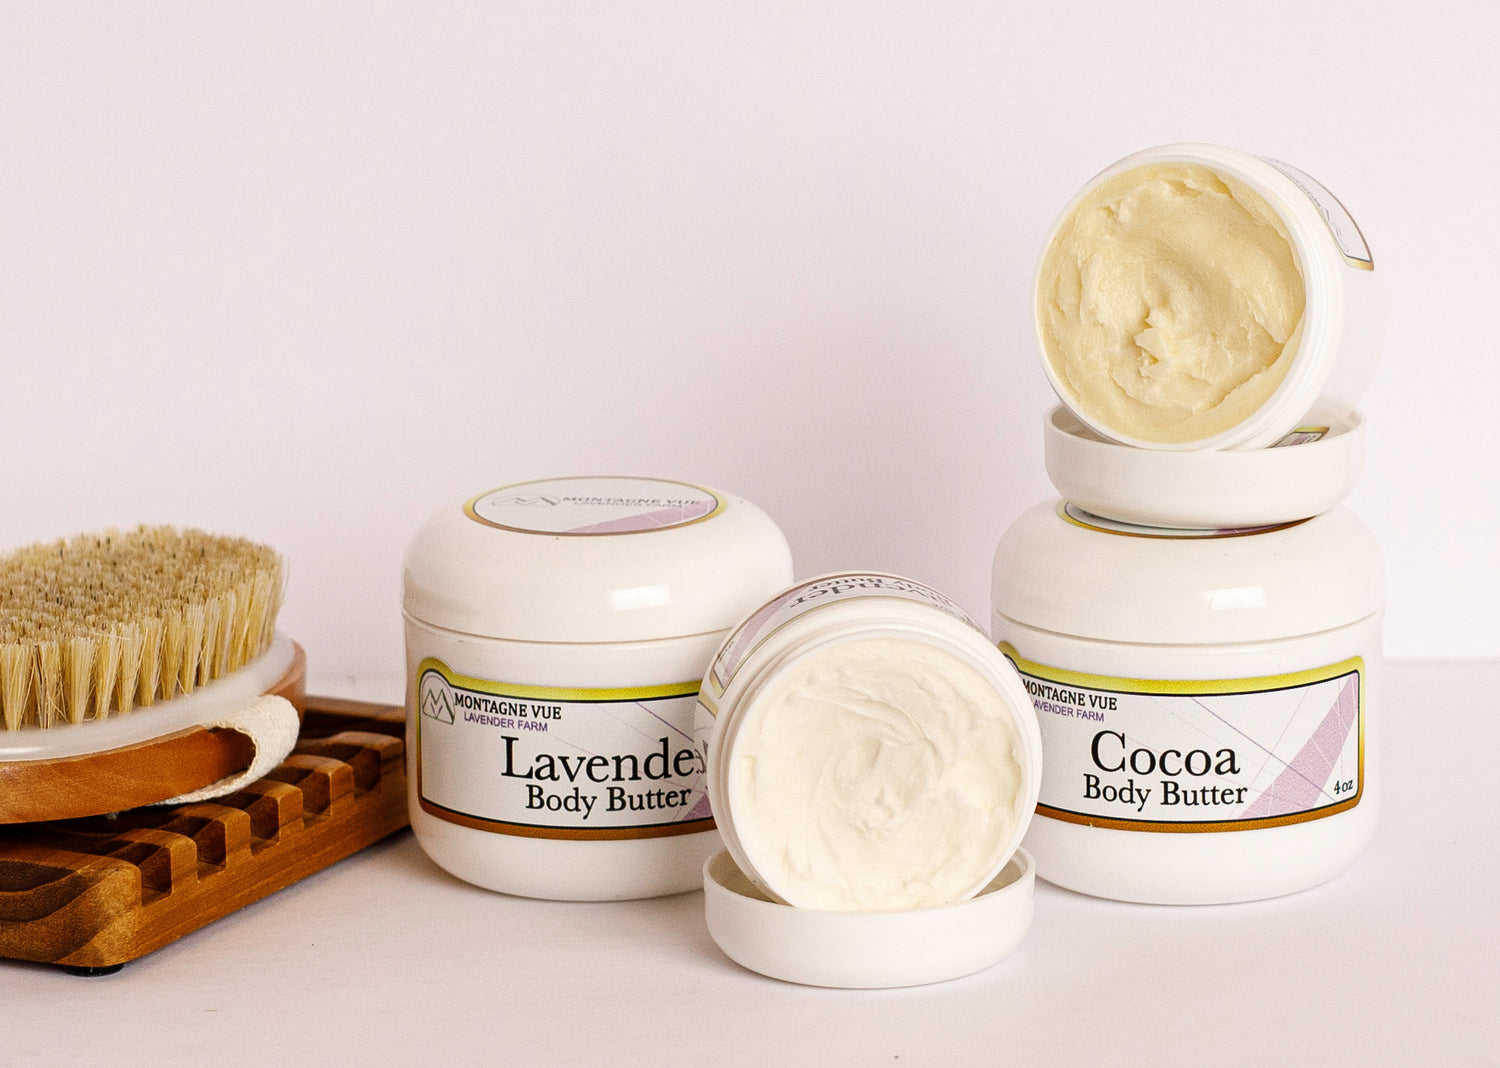 Body Butters: Cocoa Butter & Lavender Body Butter